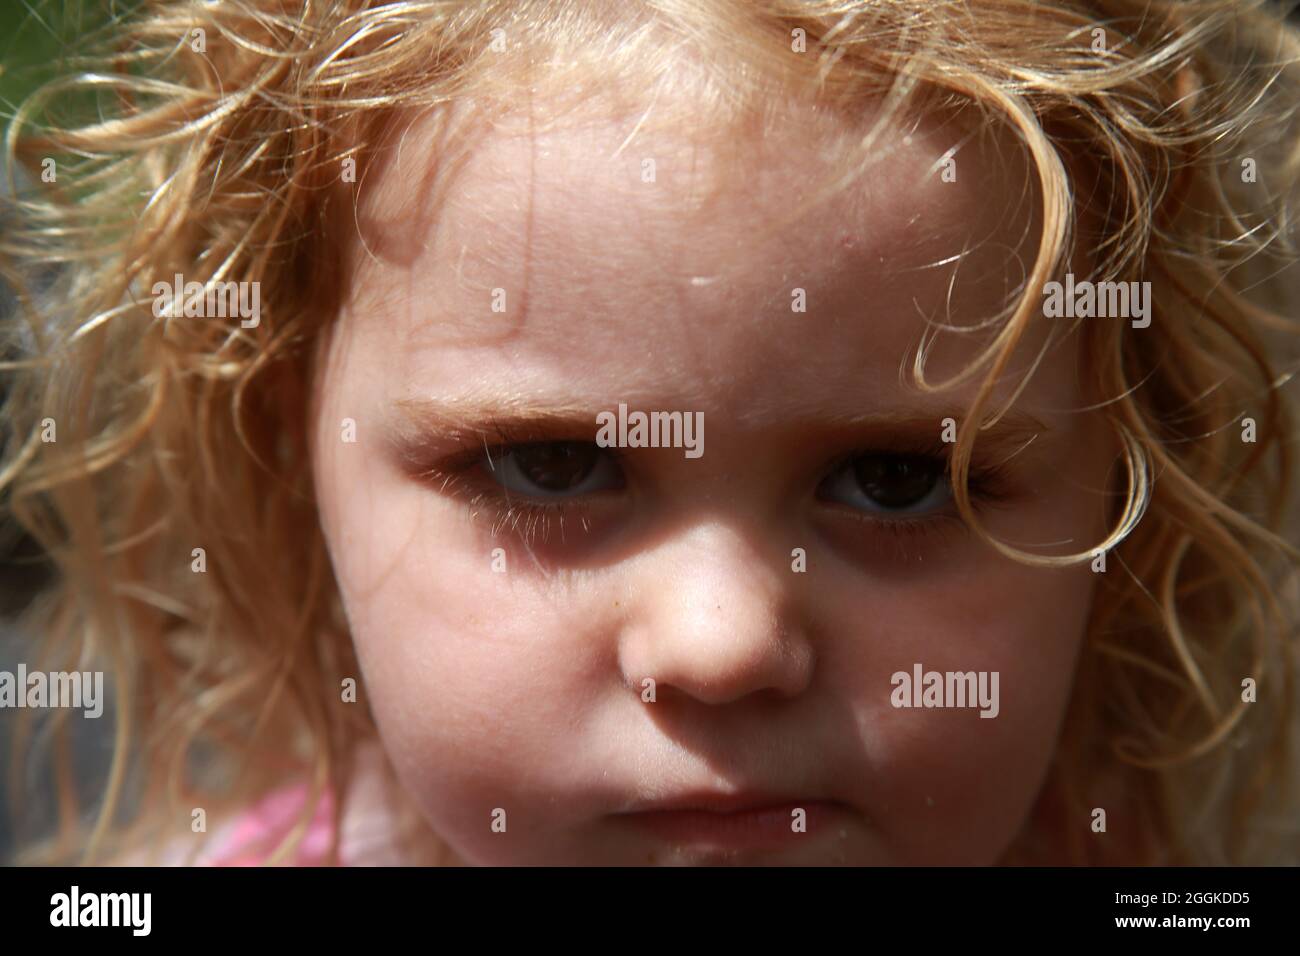 3 year old girl being told off. Stock Photo